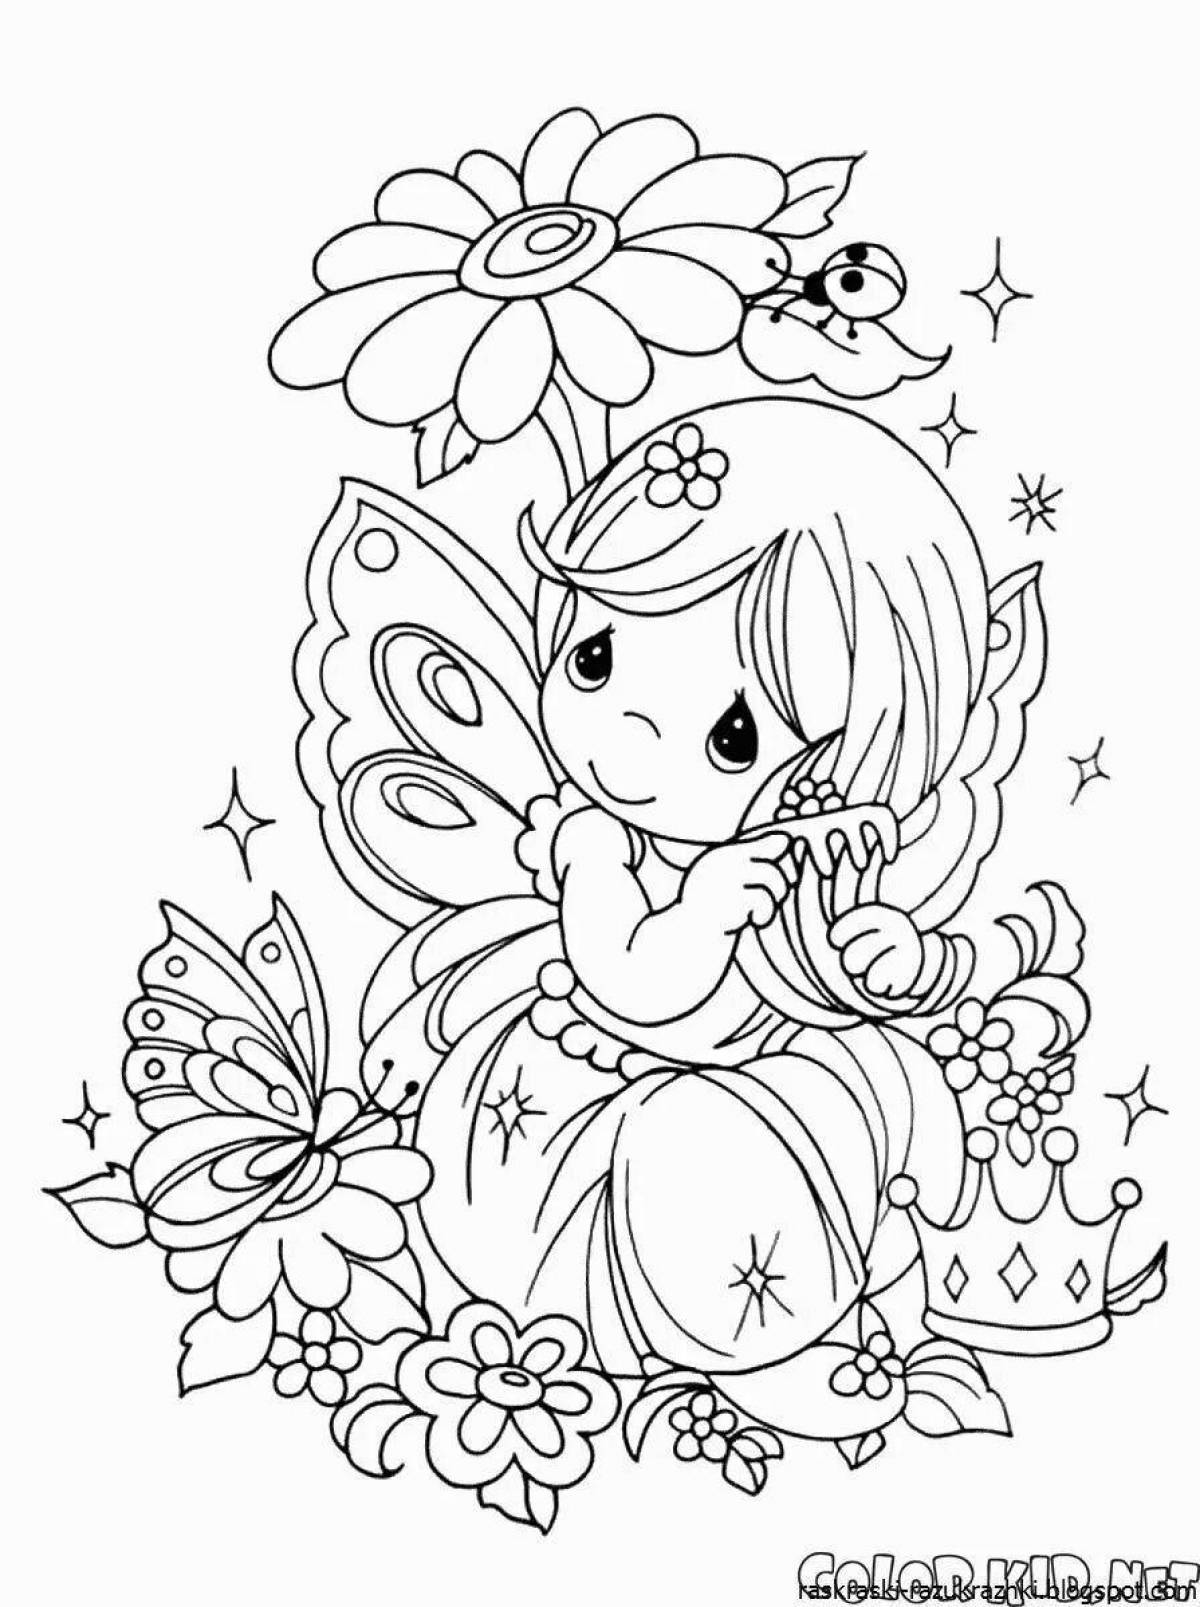 Cute coloring book for children 5 years old for girls